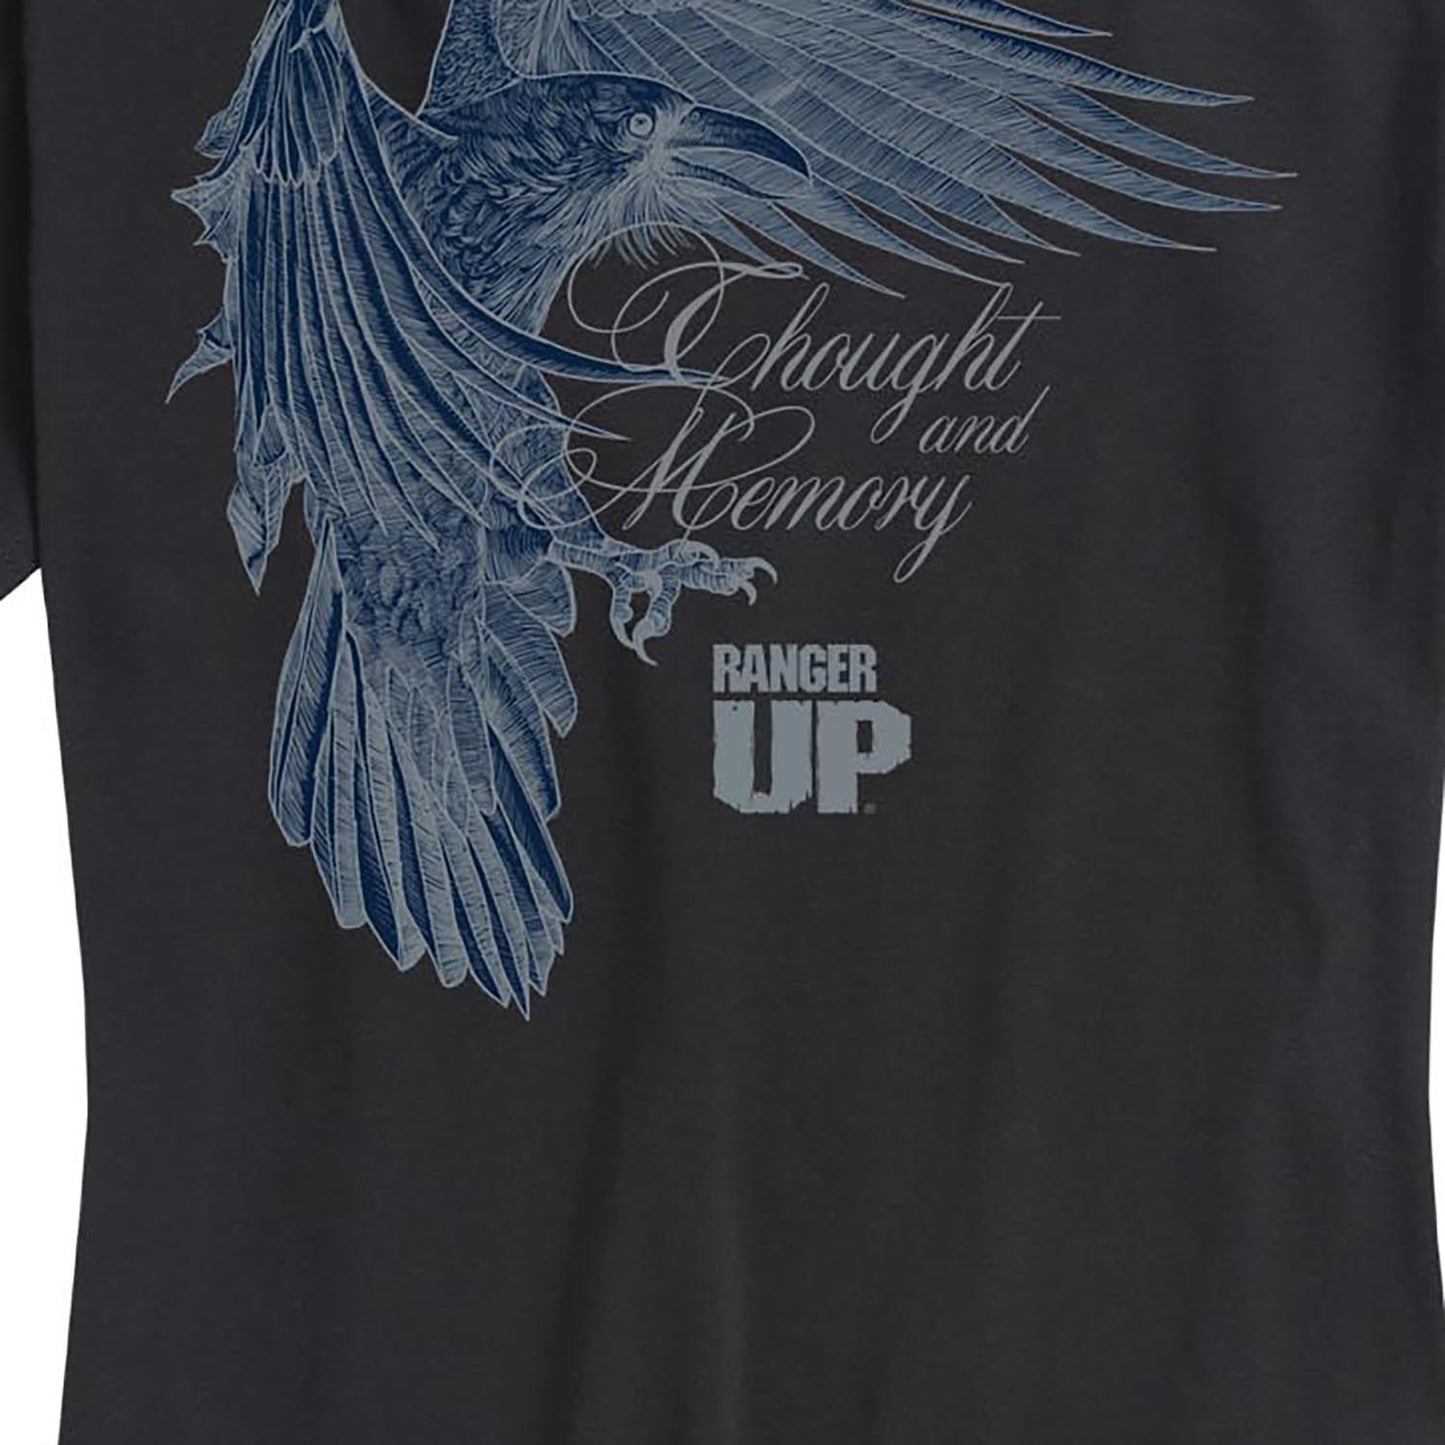 Women's Thought And Memory Raven Tee